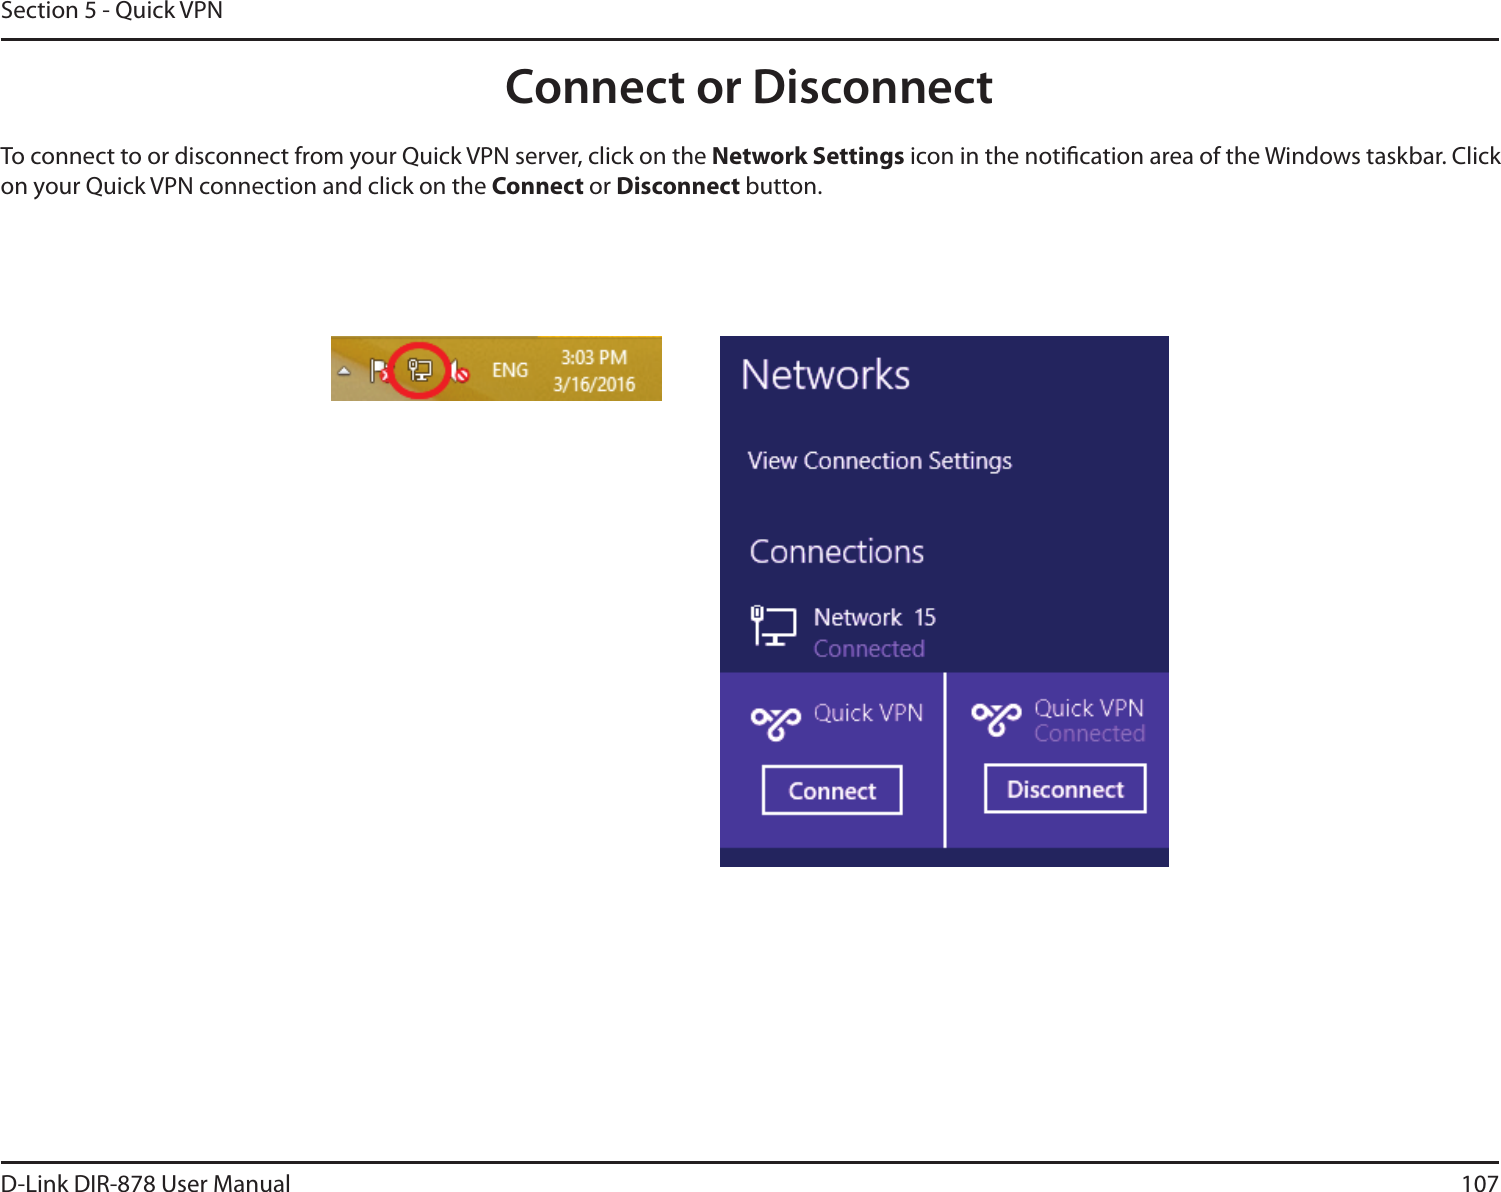 107D-Link DIR-878 User ManualSection 5 - Quick VPNConnect or DisconnectTo connect to or disconnect from your Quick VPN server, click on the Network Settings icon in the notication area of the Windows taskbar. Clickon your Quick VPN connection and click on the Connect or Disconnect button.